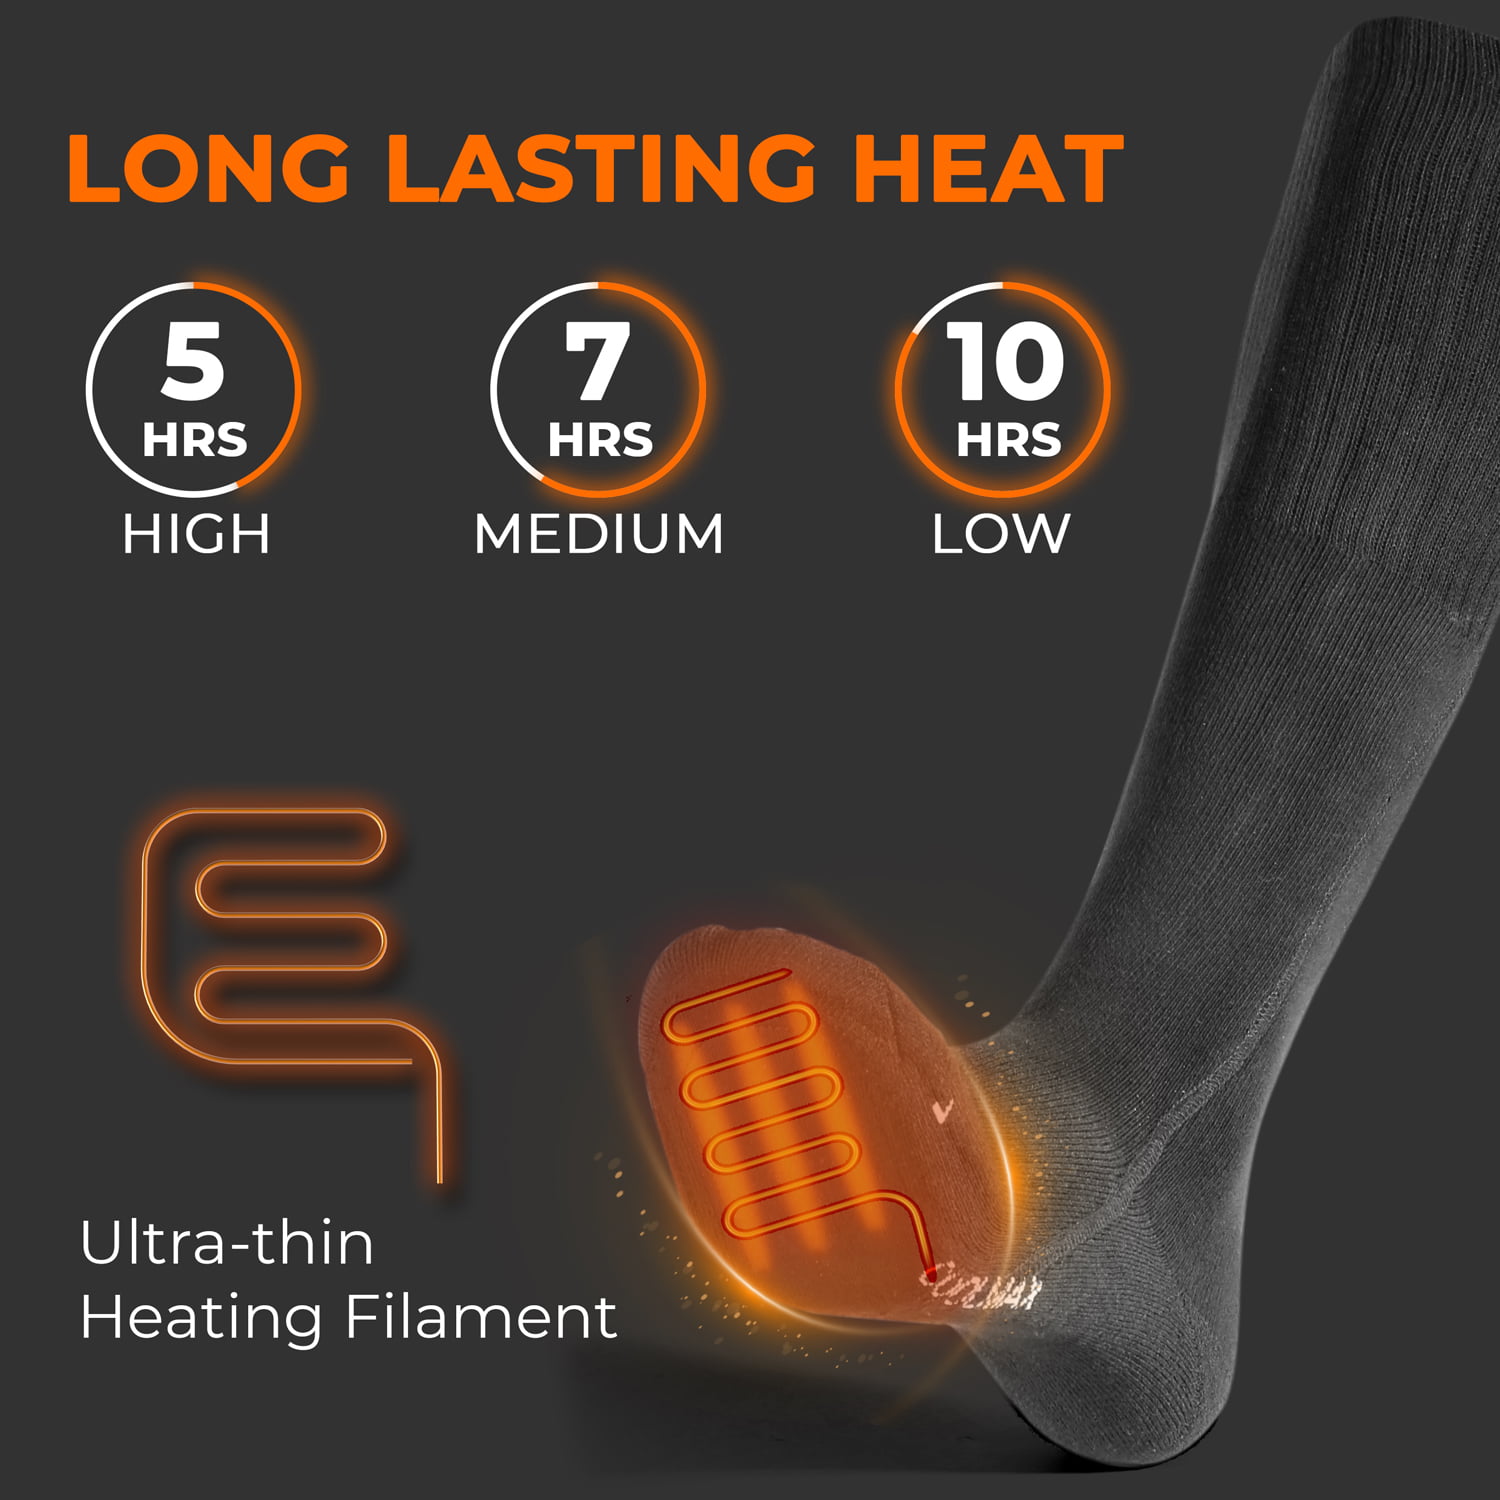 Heated Socks for Men Women,Lotiyo Electric Thermal Warm Socks Black Battery Rechargeable Foot Warmers,Thermo-Socks Kit Ideal for Cold Winter Outdoor Sports